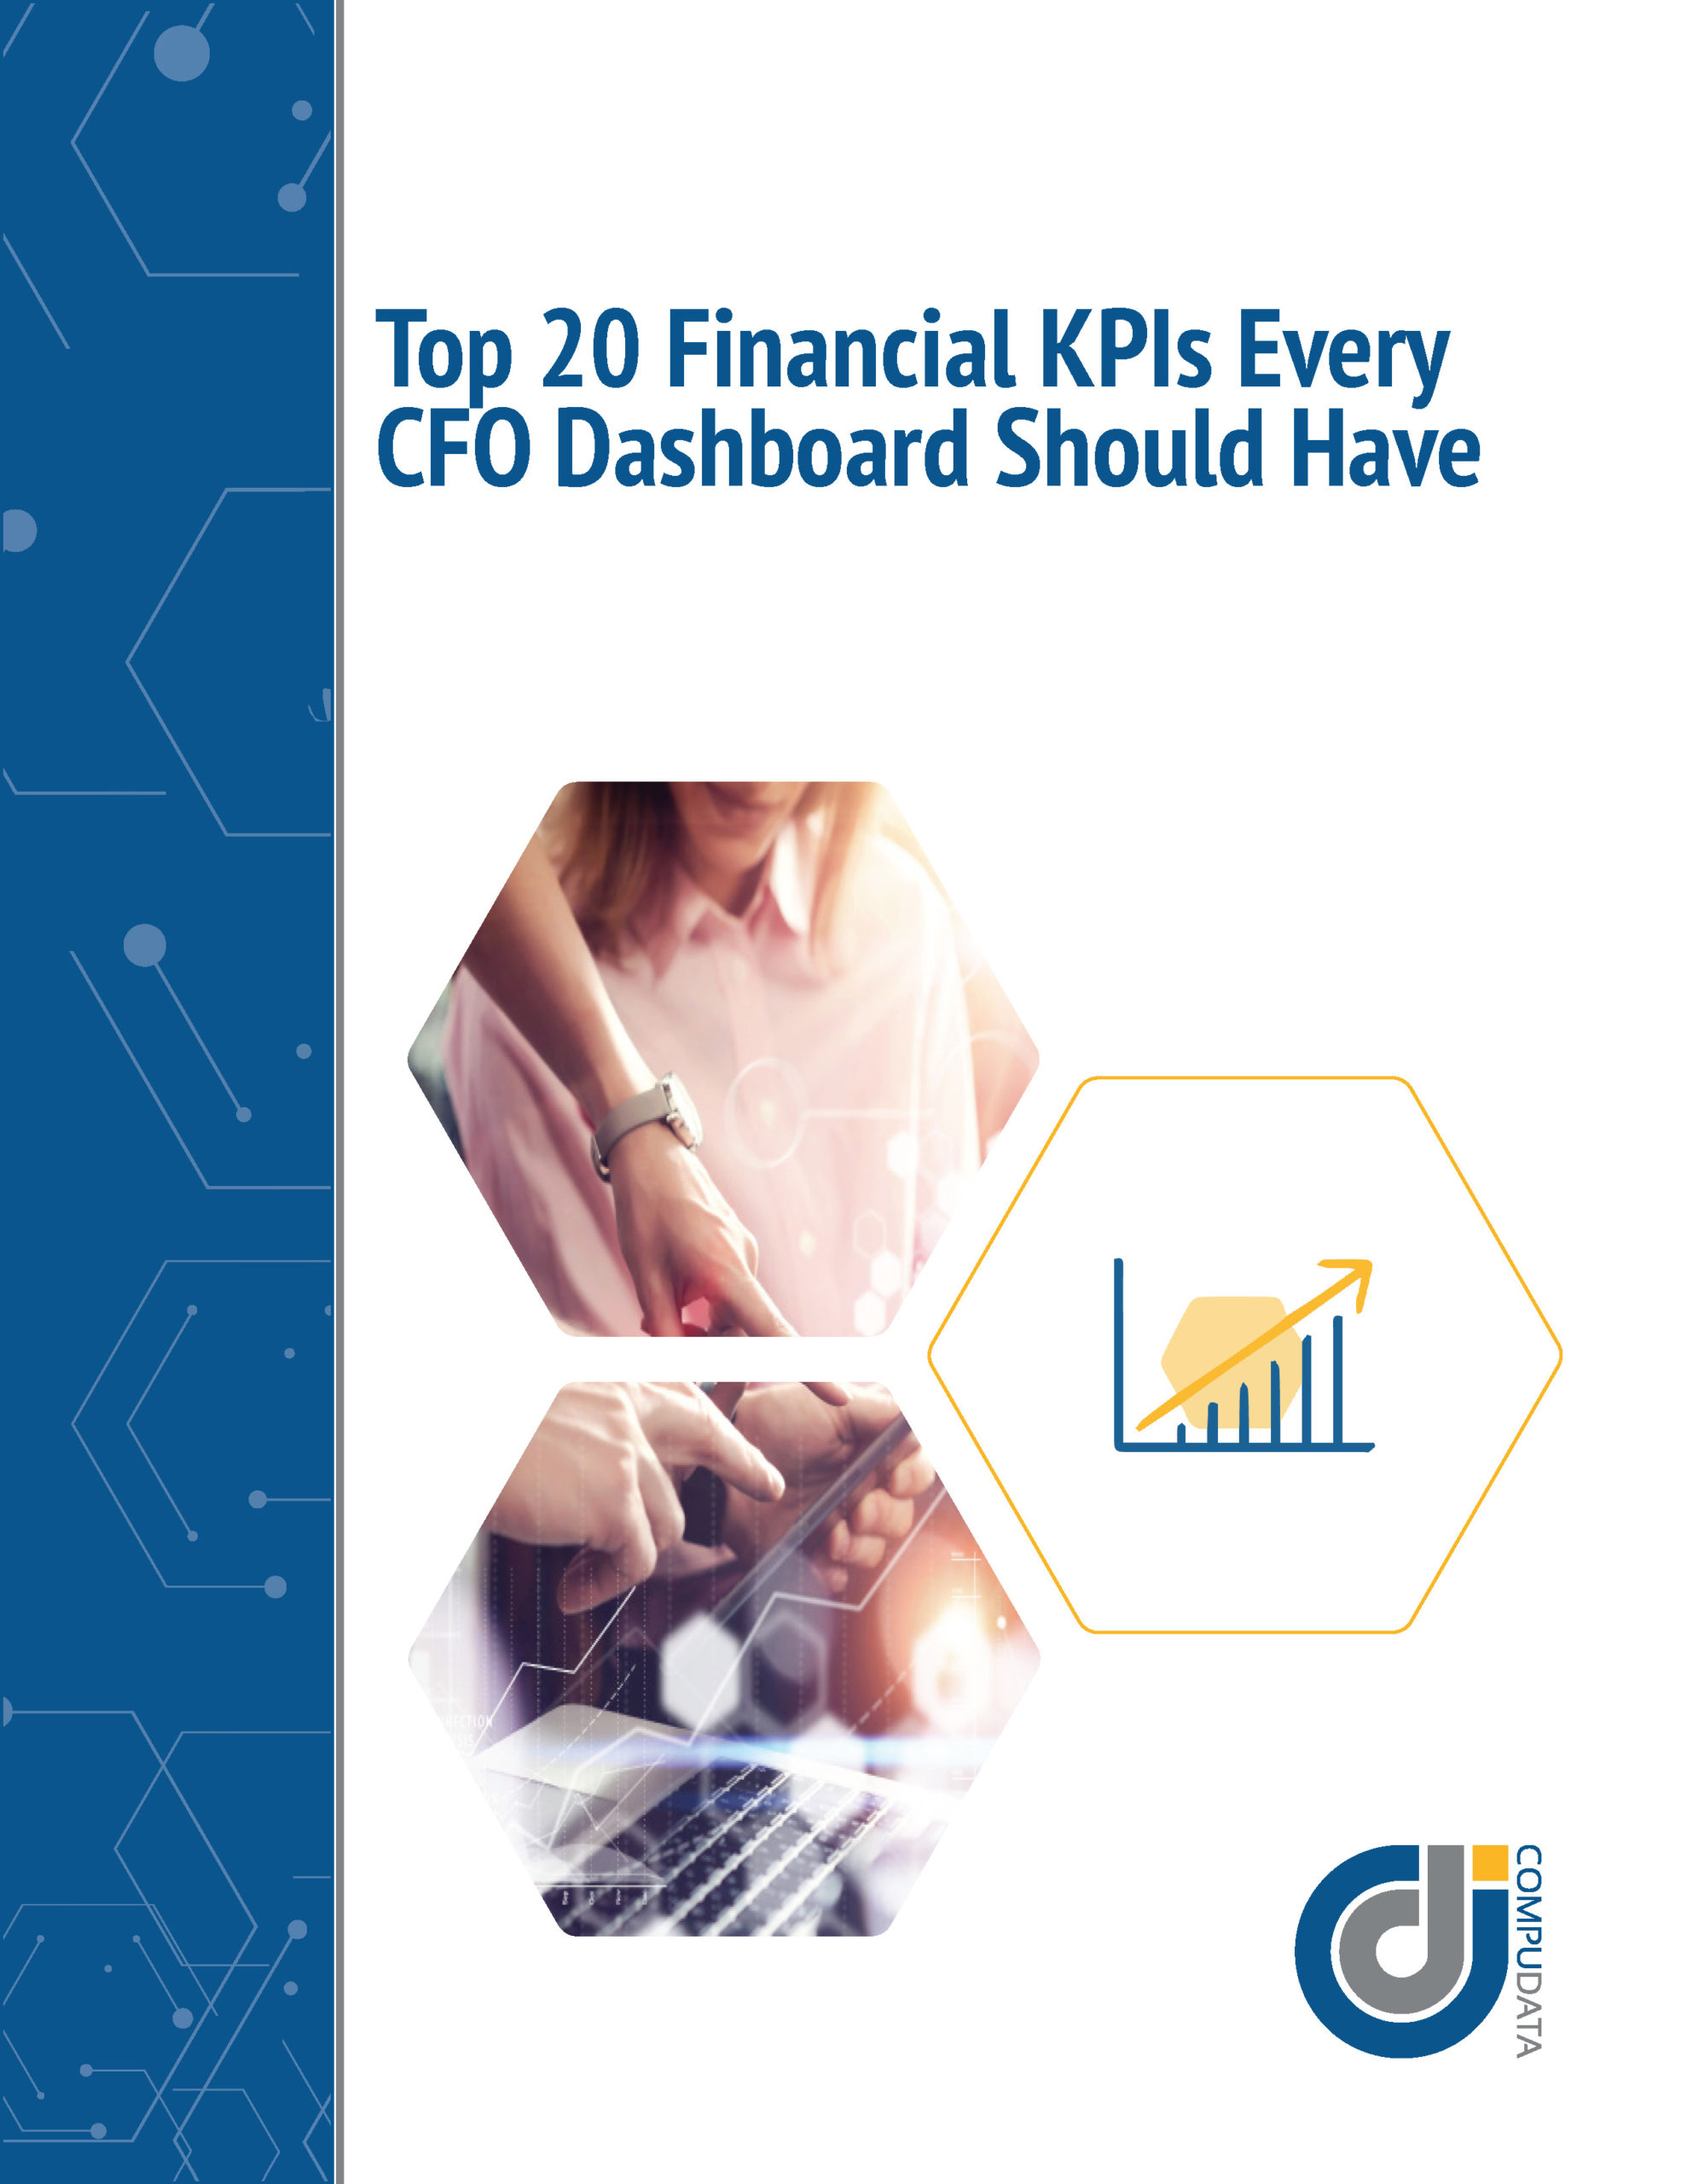 Top 20 Financial KPIs Every CFO Dashboard Should Have